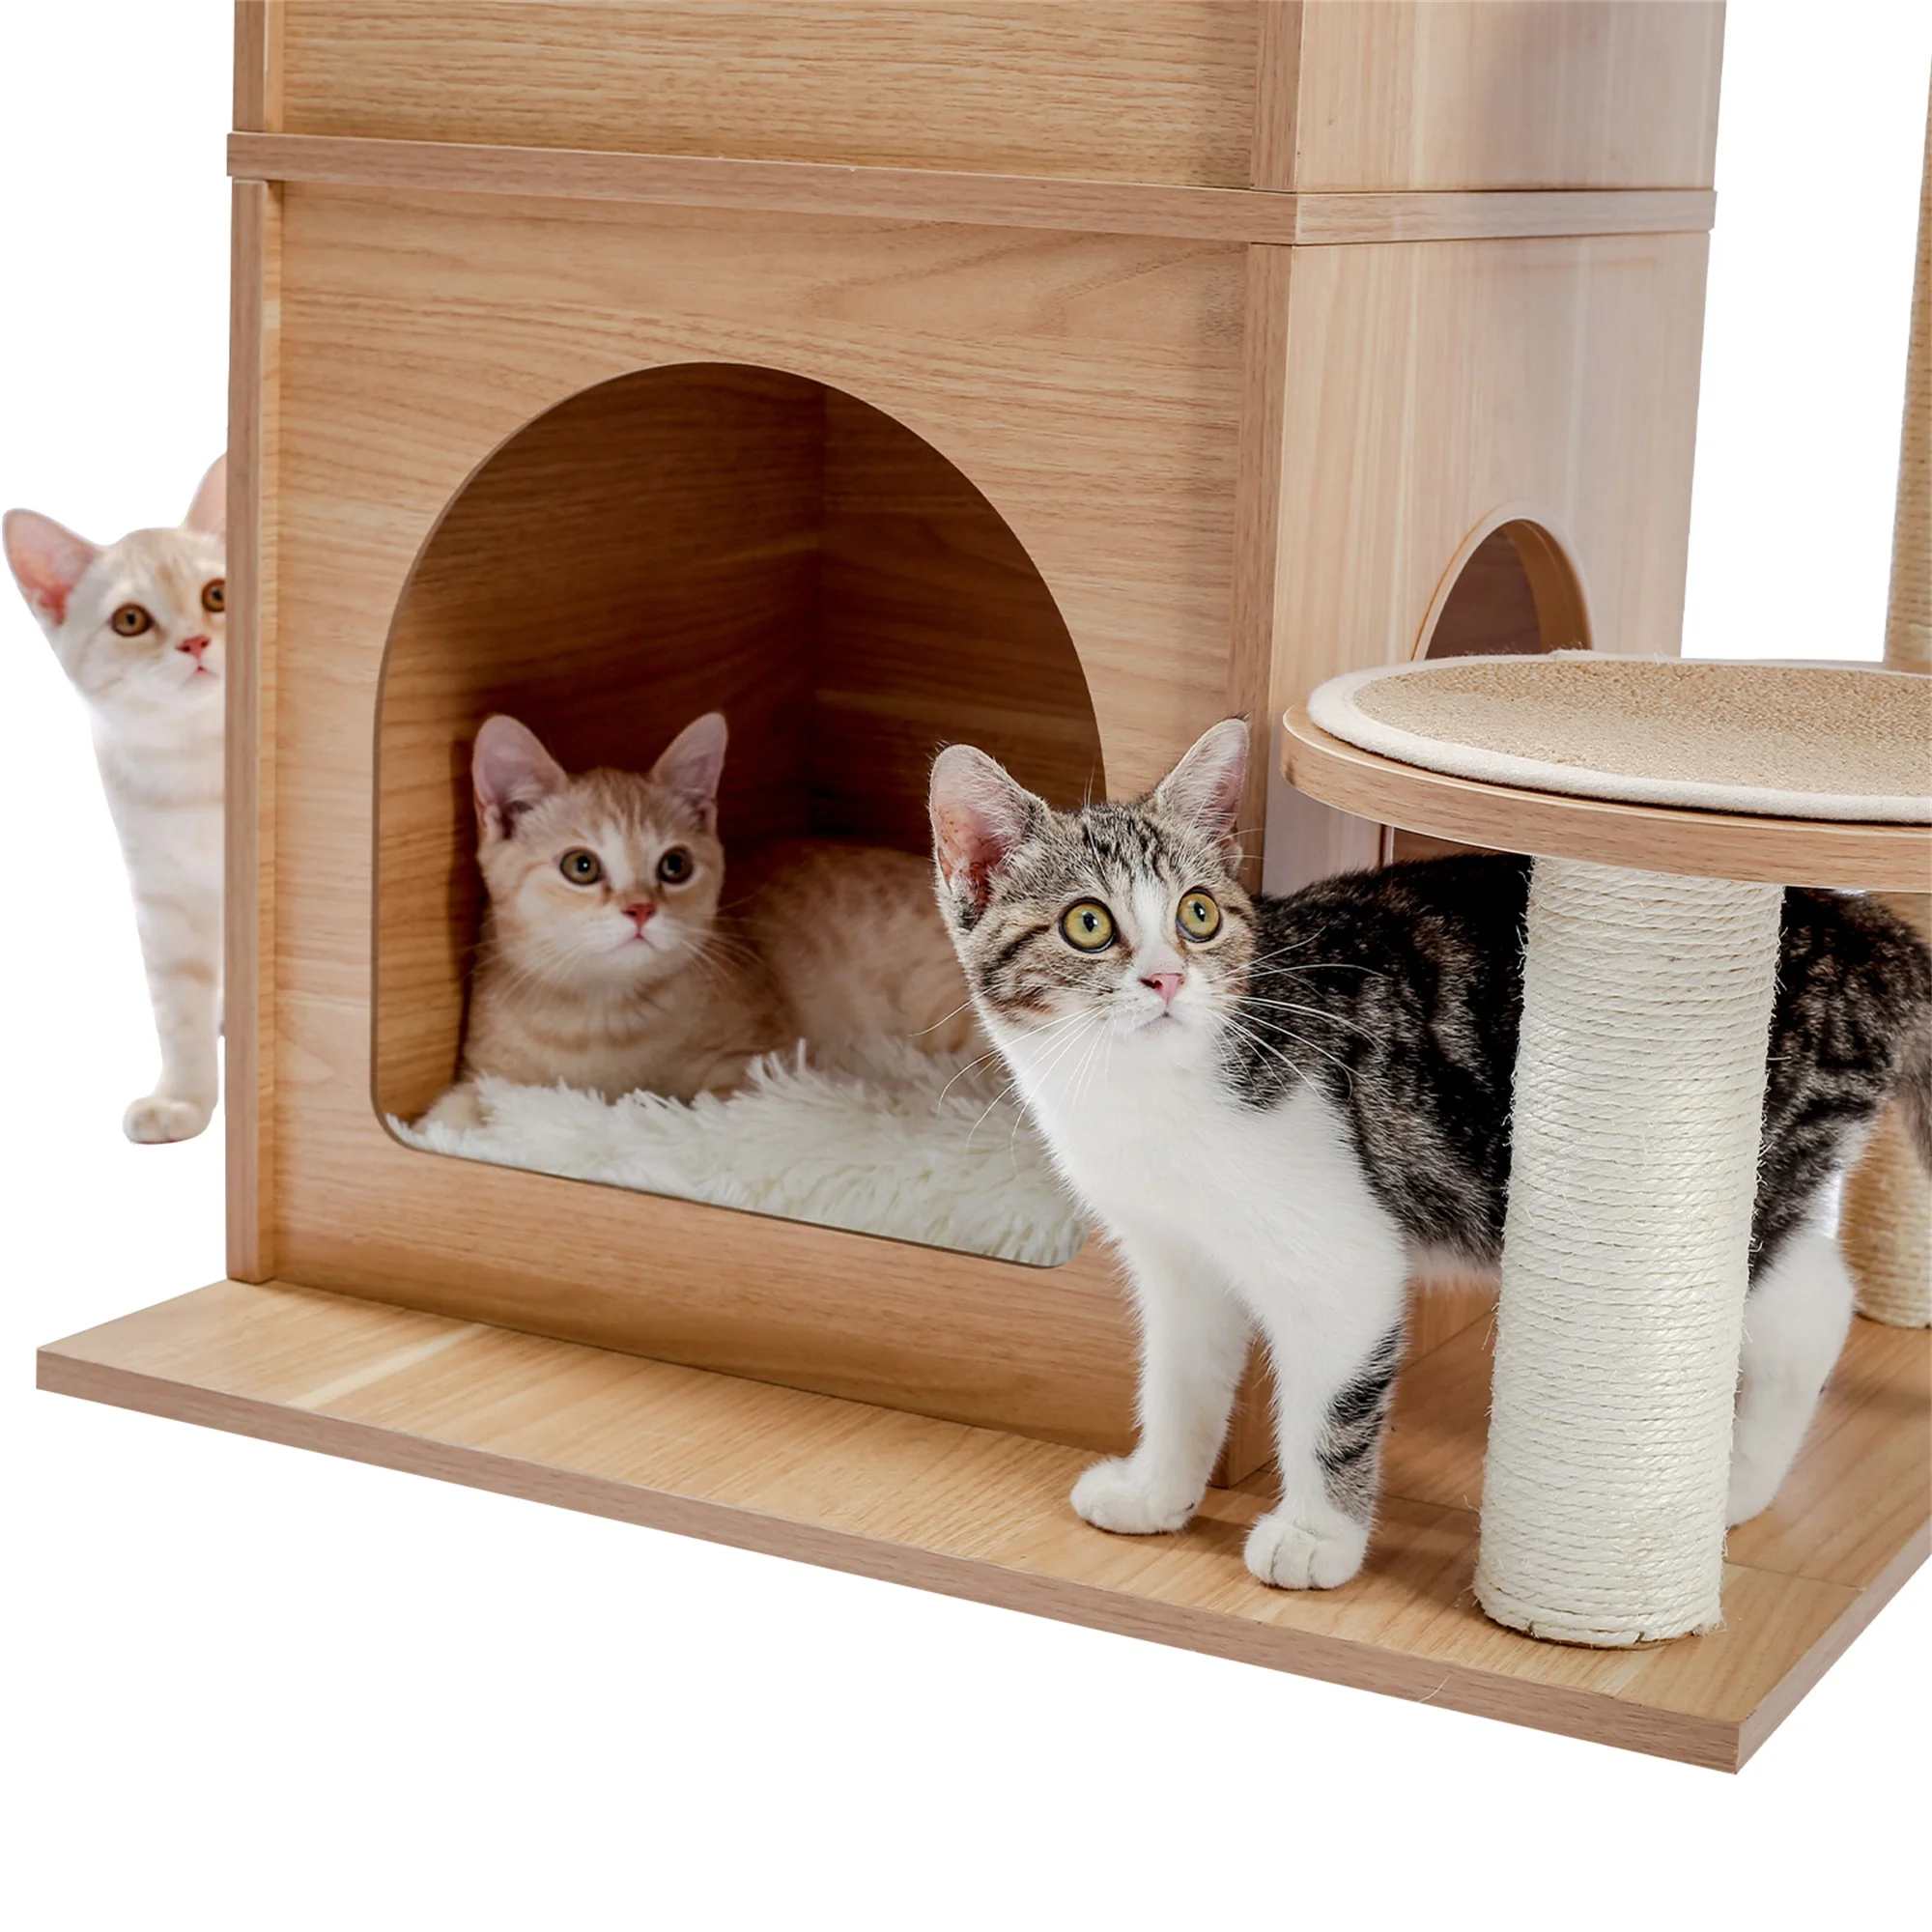 

5 Levels Modern Cat Tower Cat Sky Castle with 2 Cozy Condos, Luxury Perch and Interactive Spring Ball, Beige